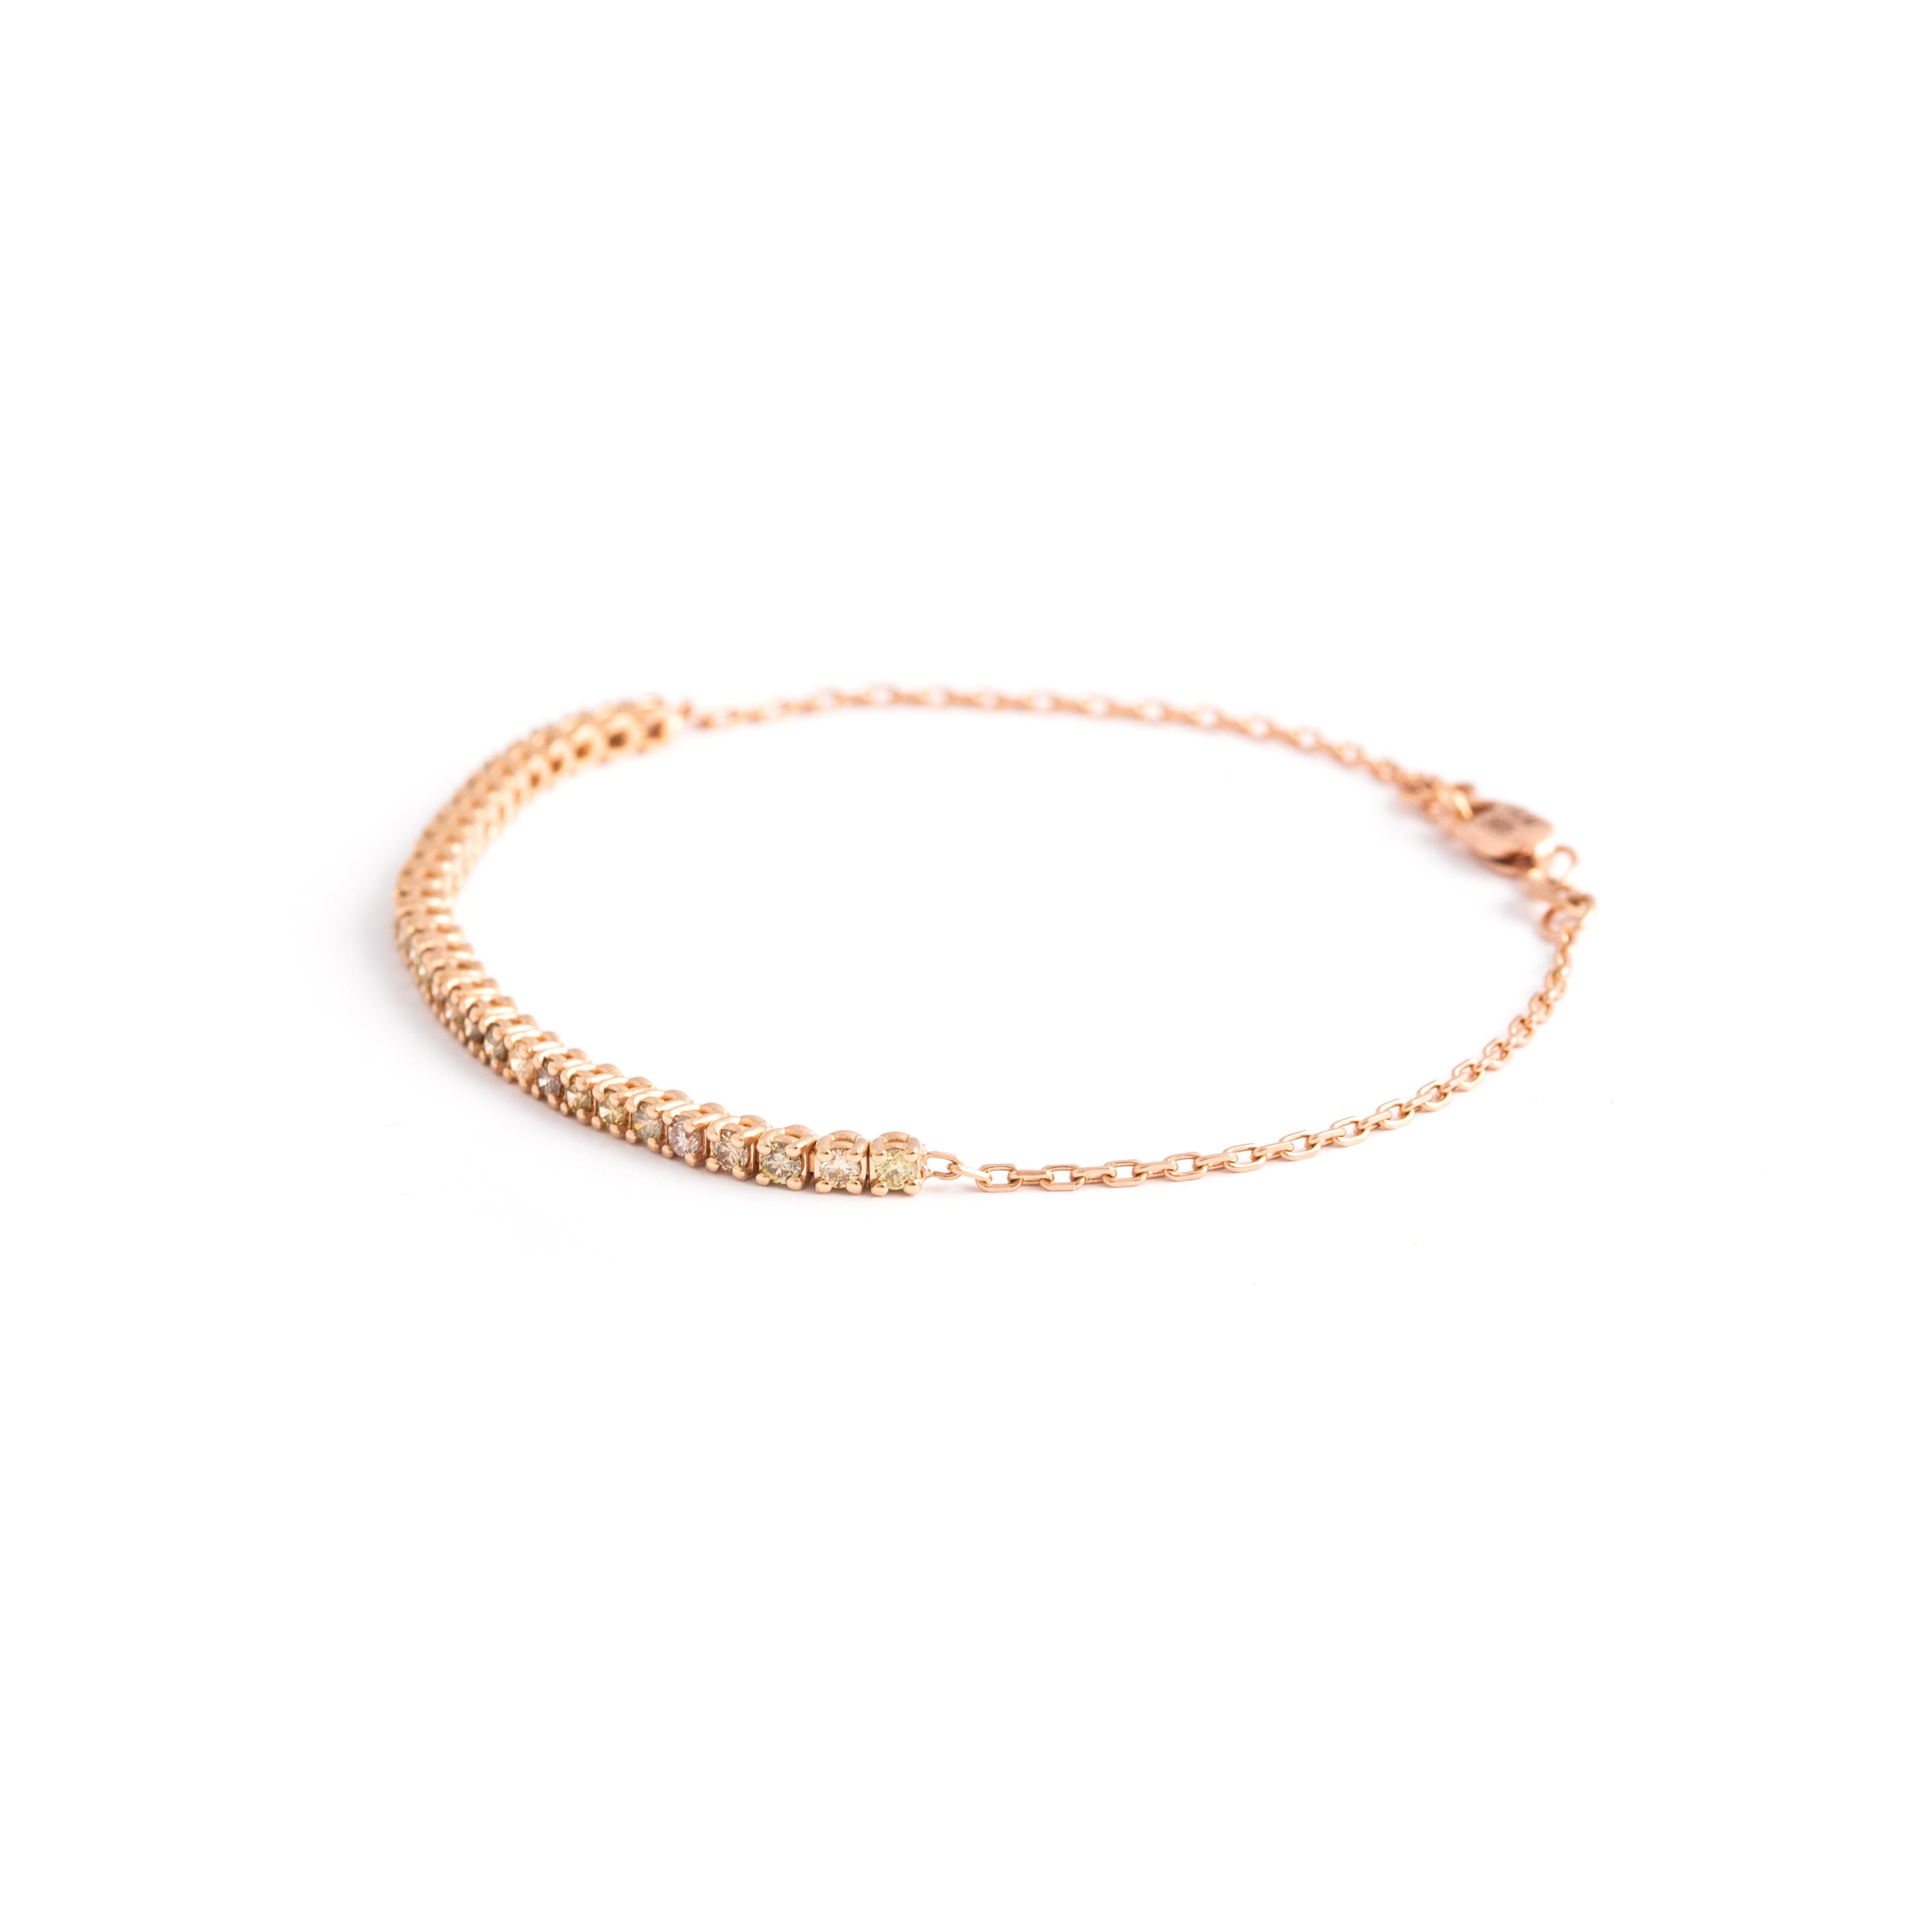 Diamond yellow gold 14K Bracelet.
According AIG certificate:
30 Round cut Natural Diamonds weighting 0.97 carat total.
Mix Colors.
VS2 to SI2.
Gross weight: 3.37 grams.